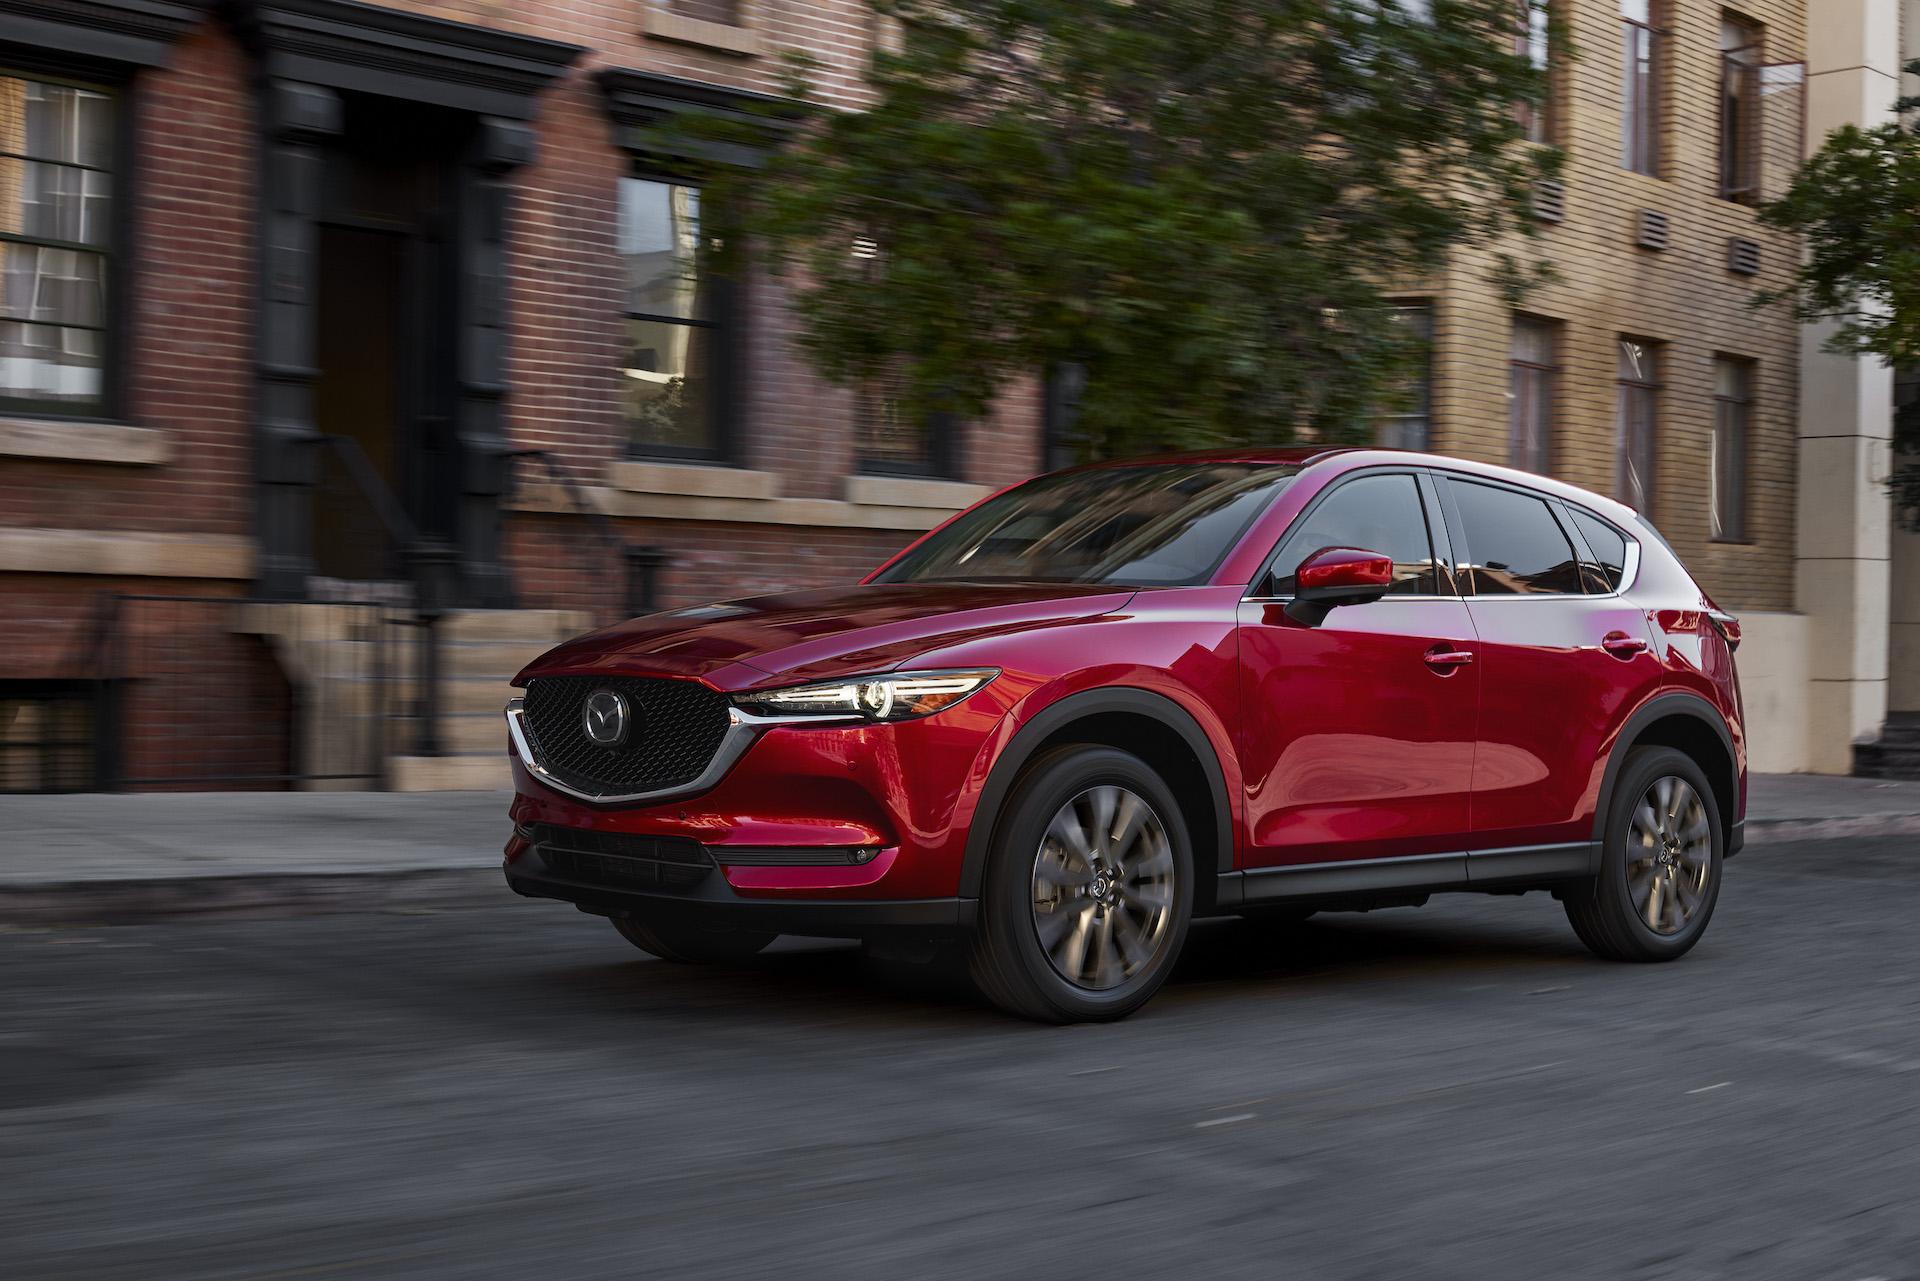 New And Used Mazda Cx 5 Prices Photos Reviews Specs The Car Connection